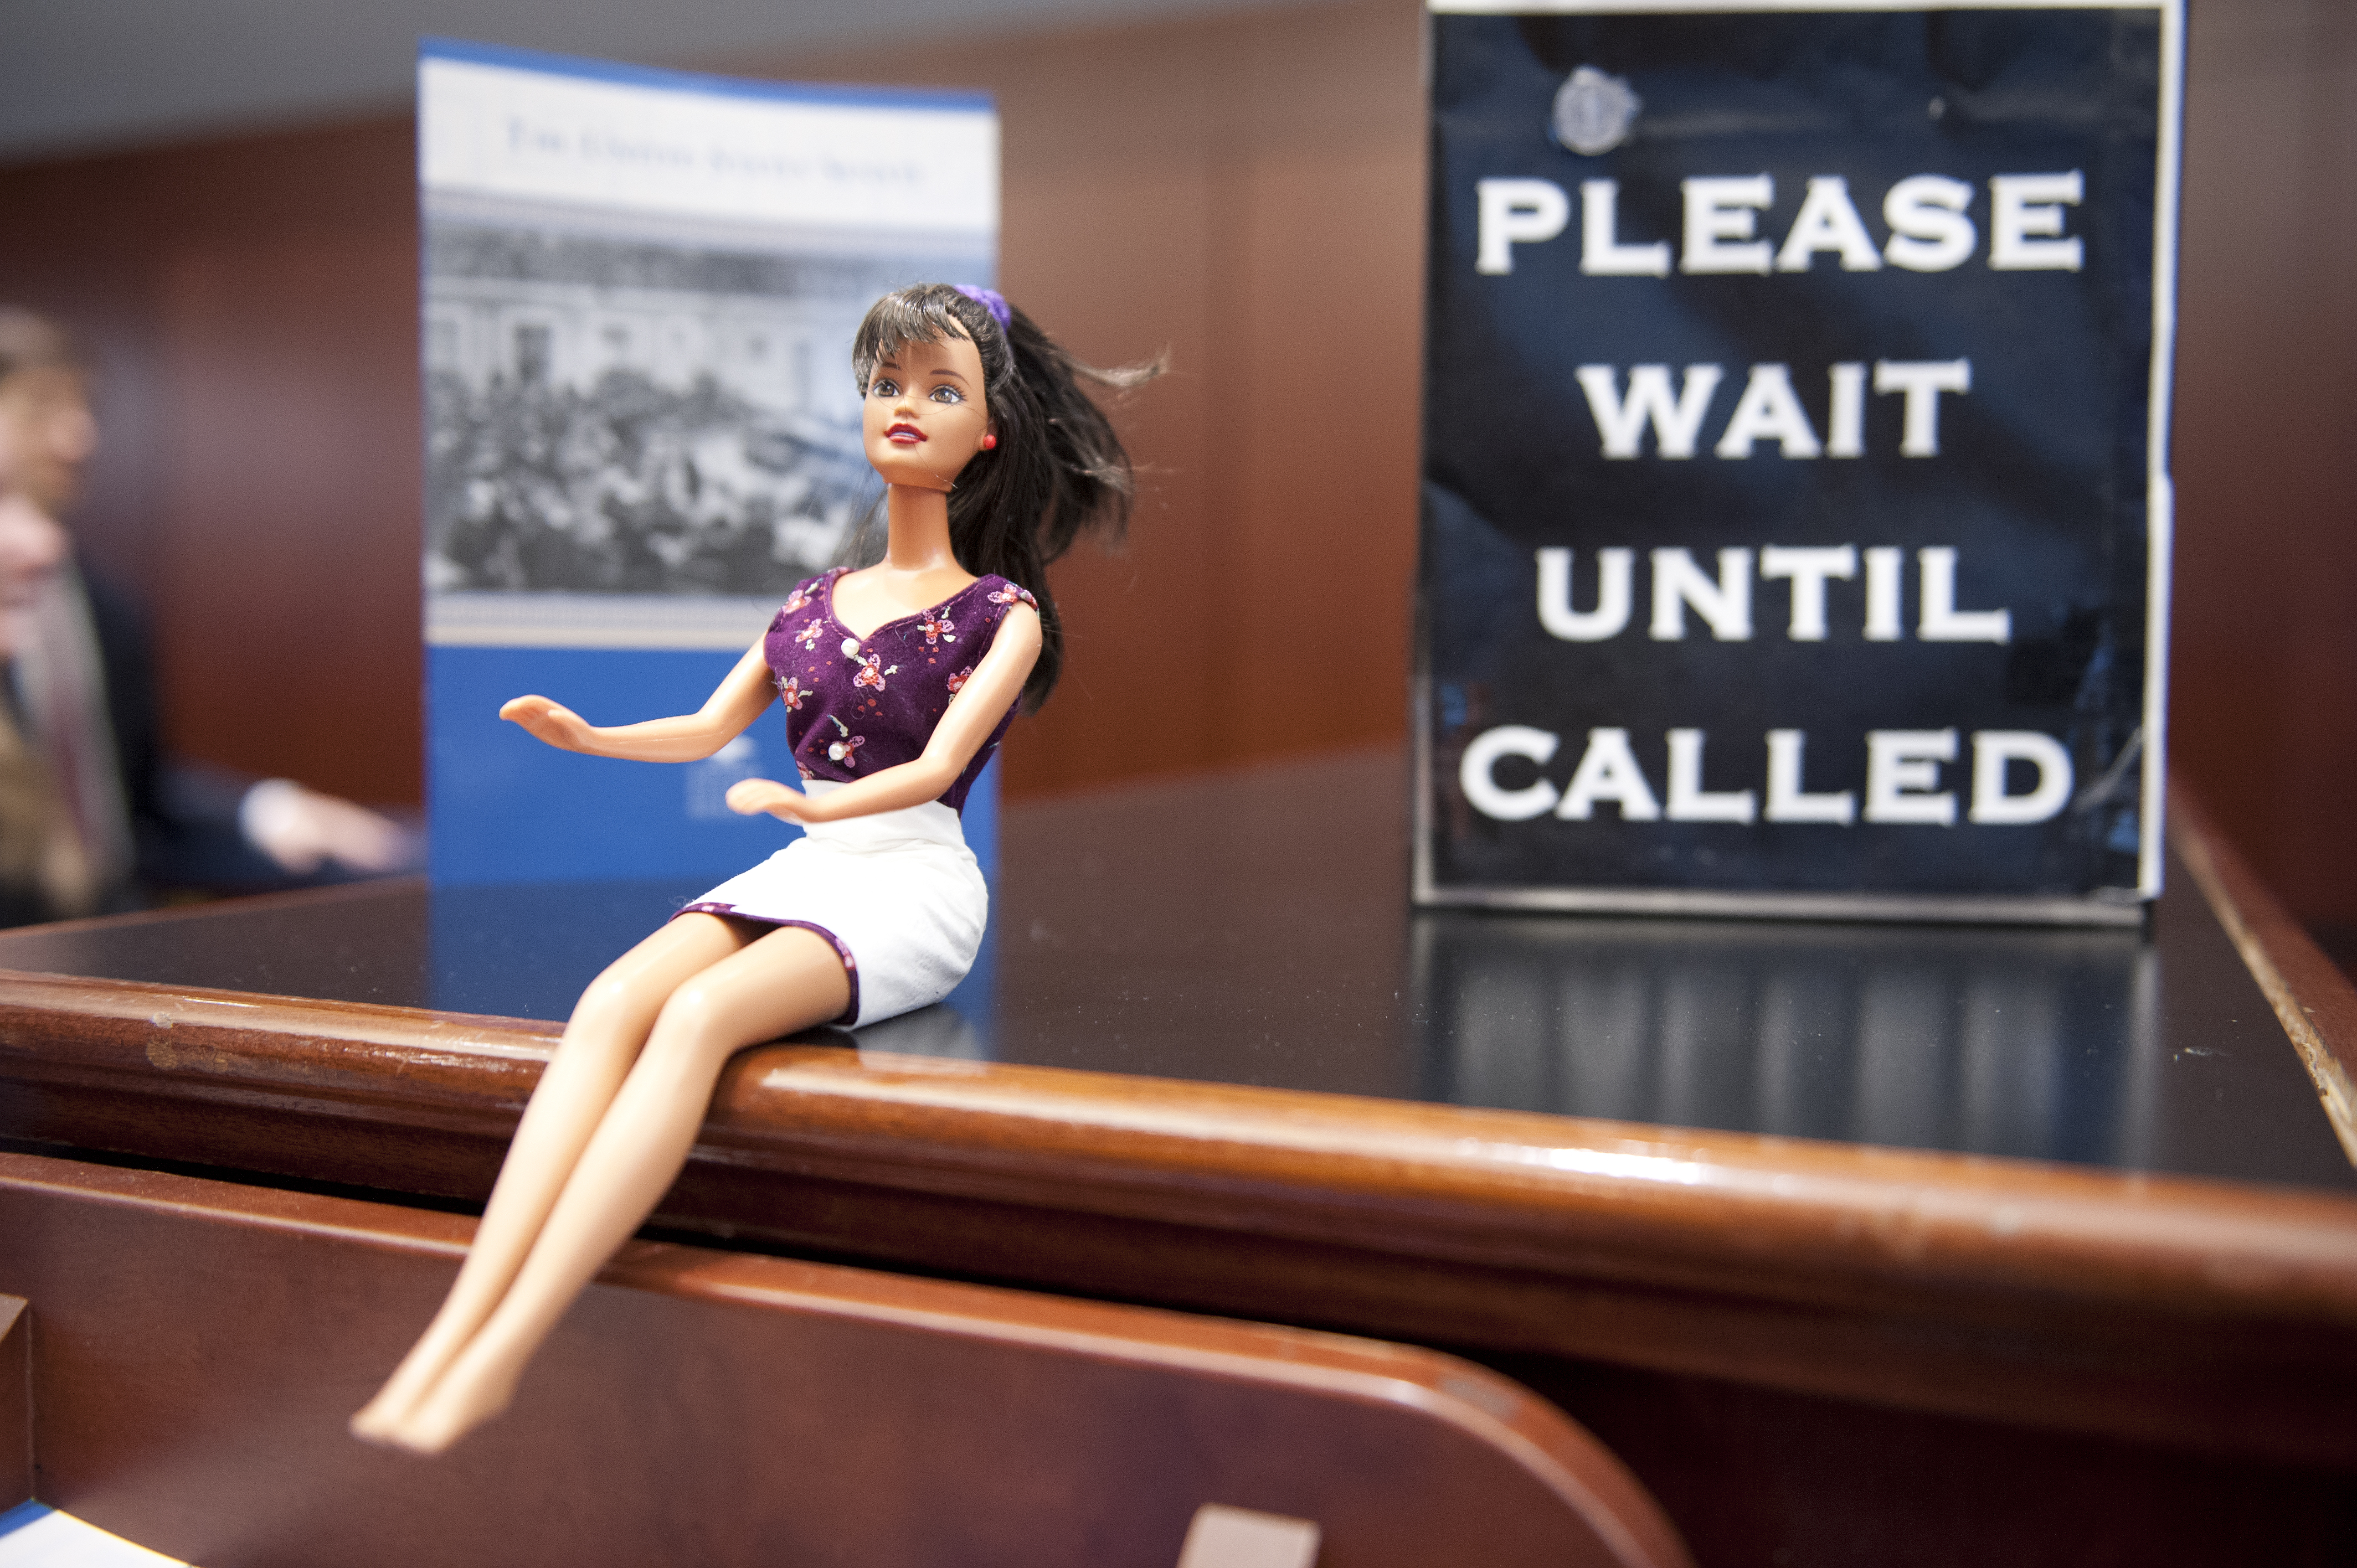 Check In Barbie greets visitors to the Senate Gallery Check In in the Capitol Visitors Center of the U.S. Capitol on January 15, 2014. (Douglas Graham&mdash;CQ-Roll Call,Inc.)